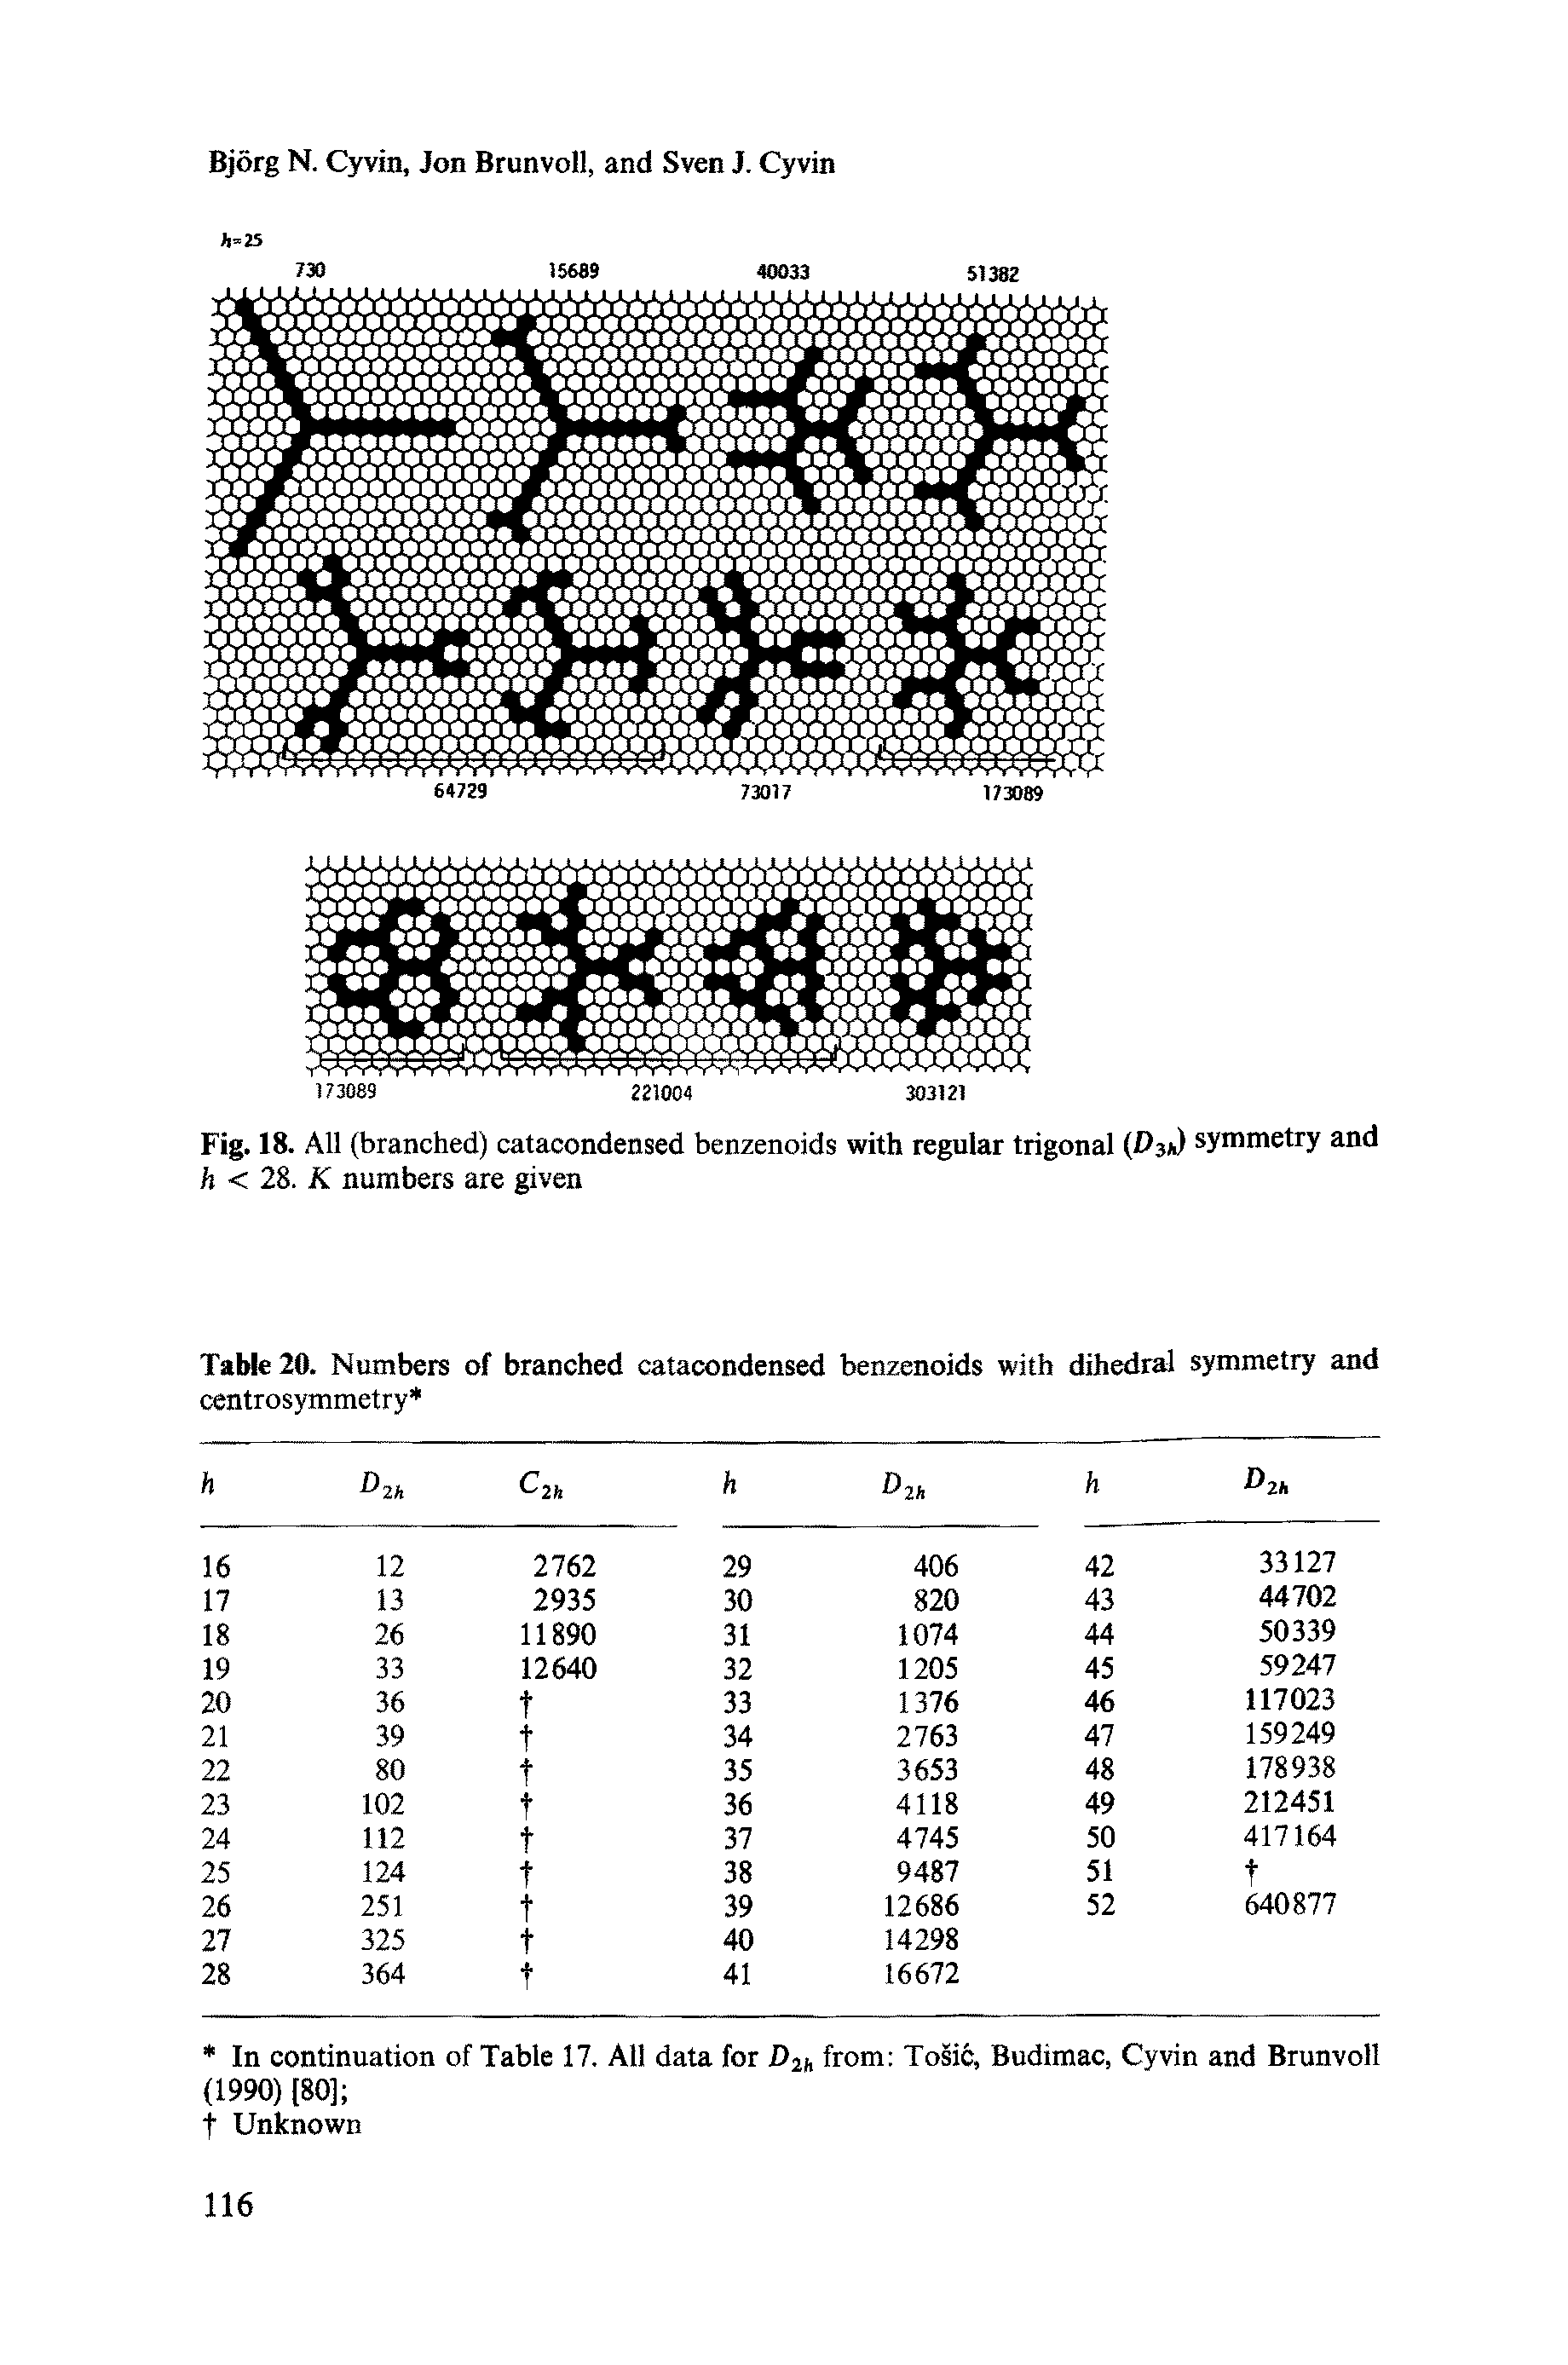 Table 20. Numbers of branched catacondensed benzenoids with dihedral symmetry and centrosymmetry ...